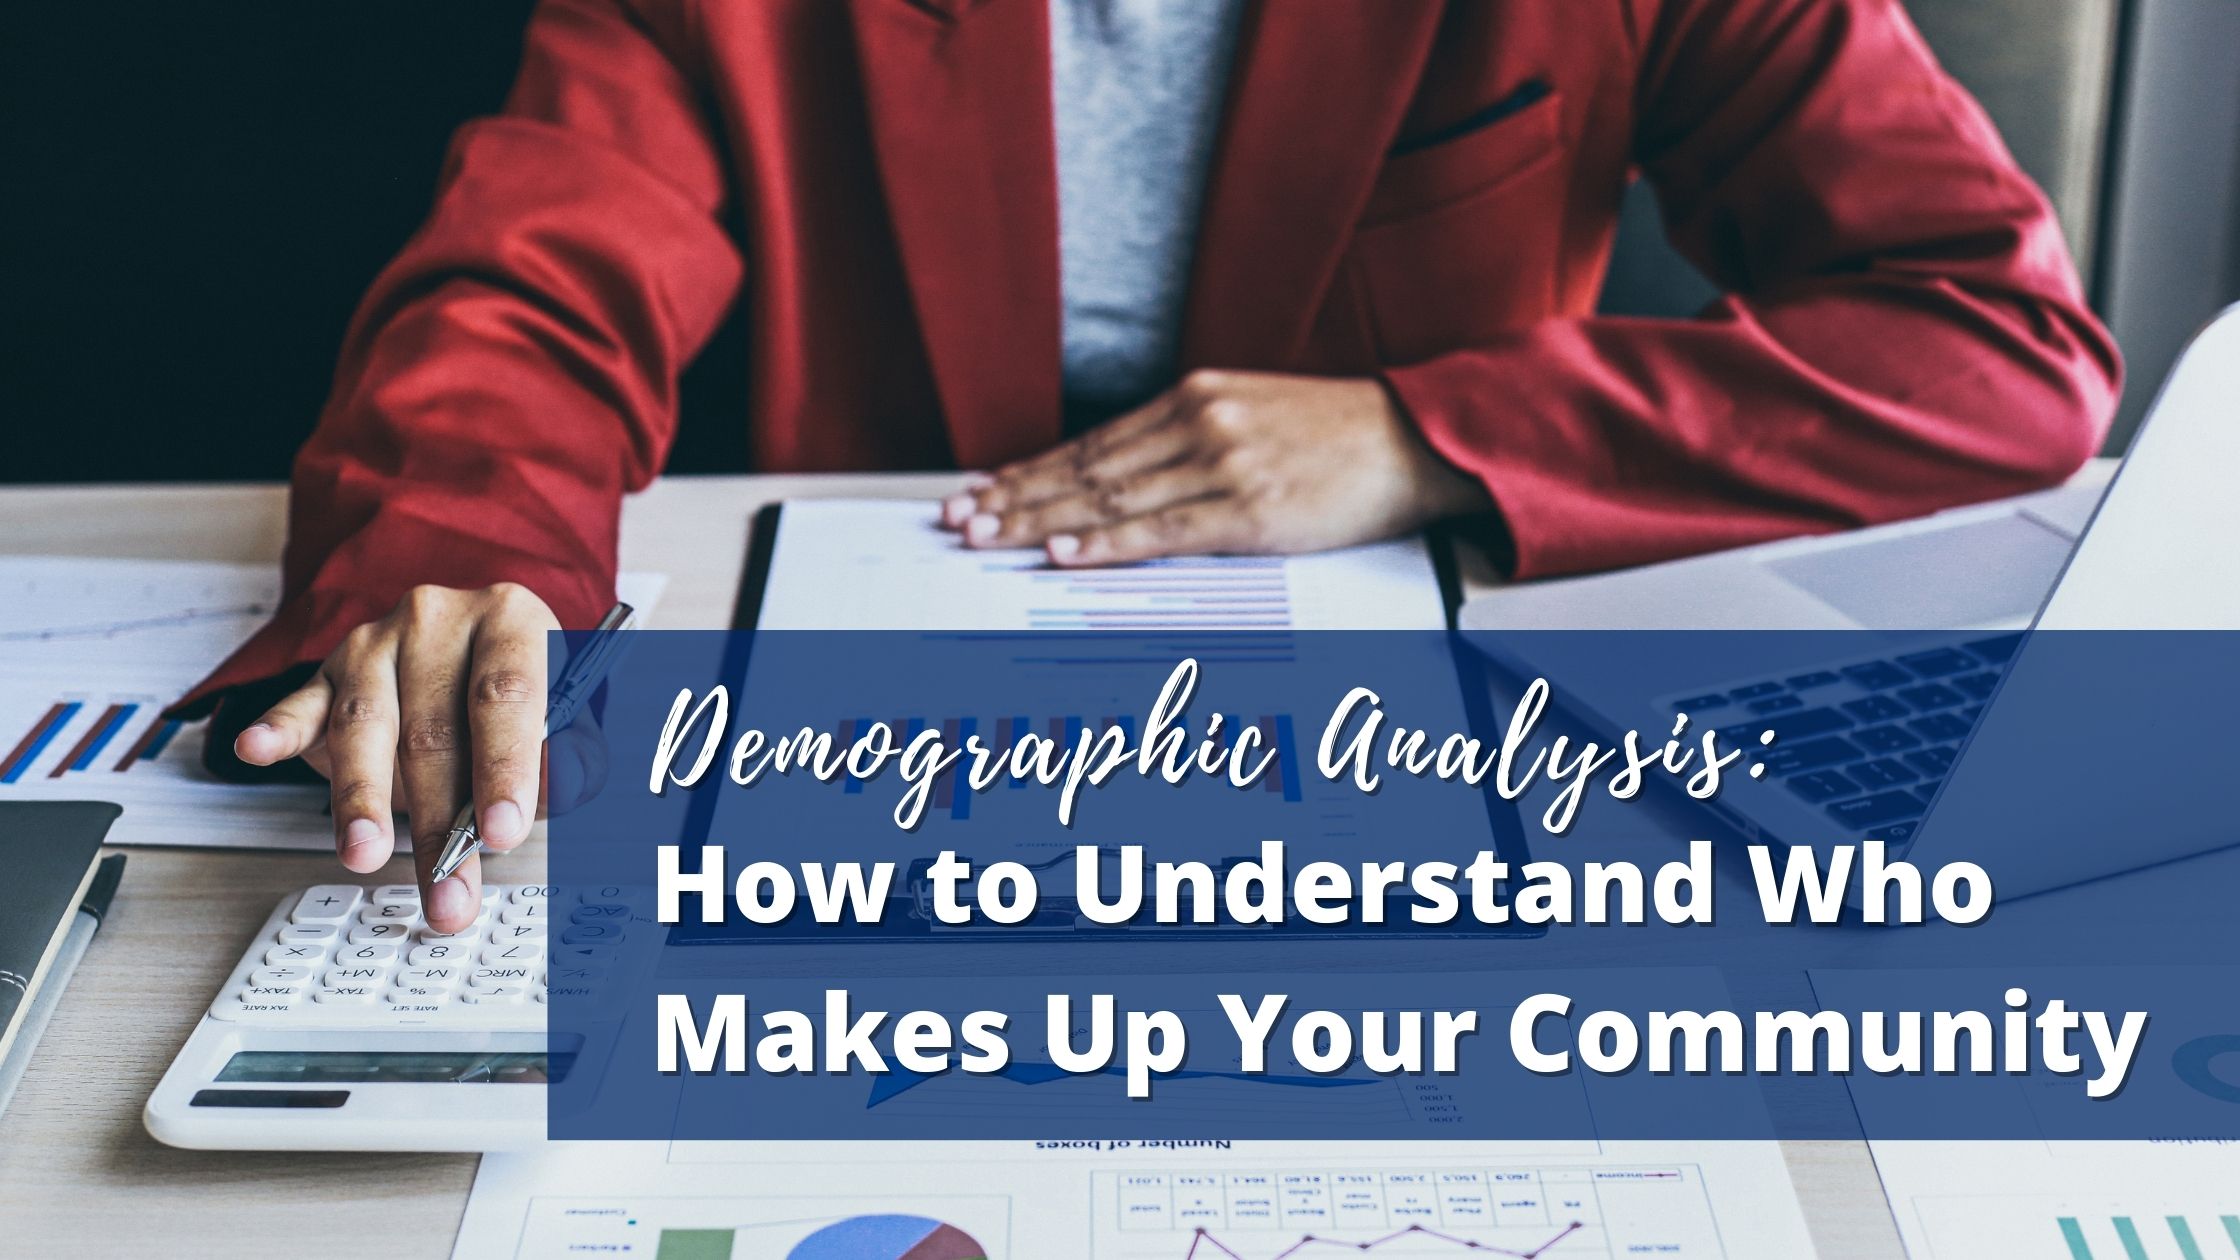 Demographic Analysis: How to Understand Who Makes Up Your Community